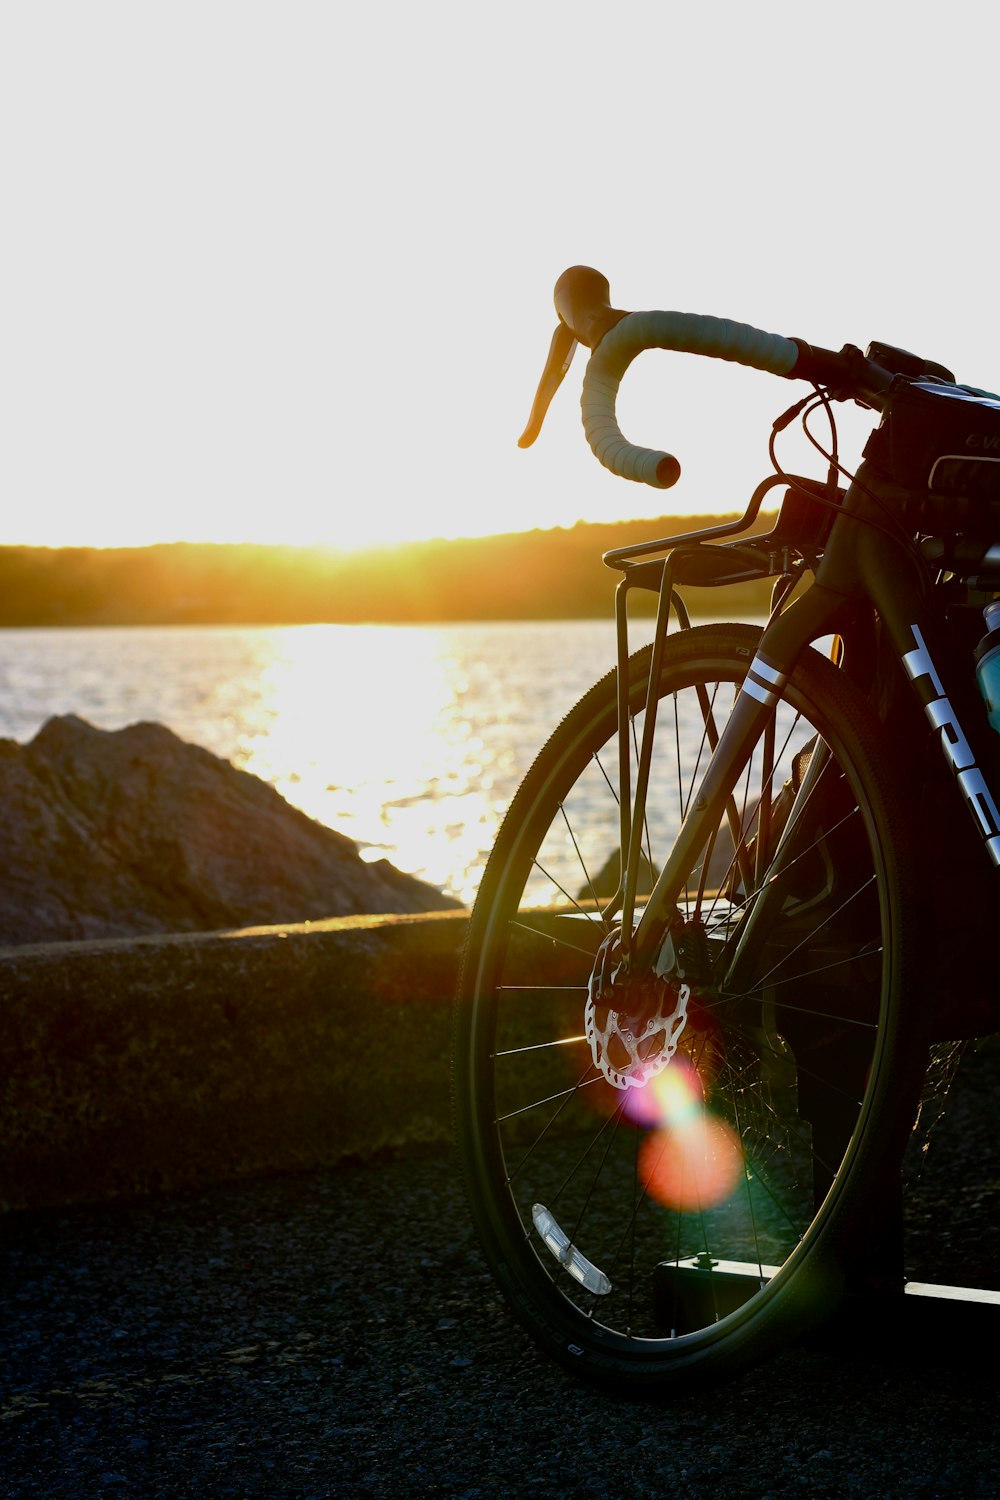 black bicycle near body of water during sunset